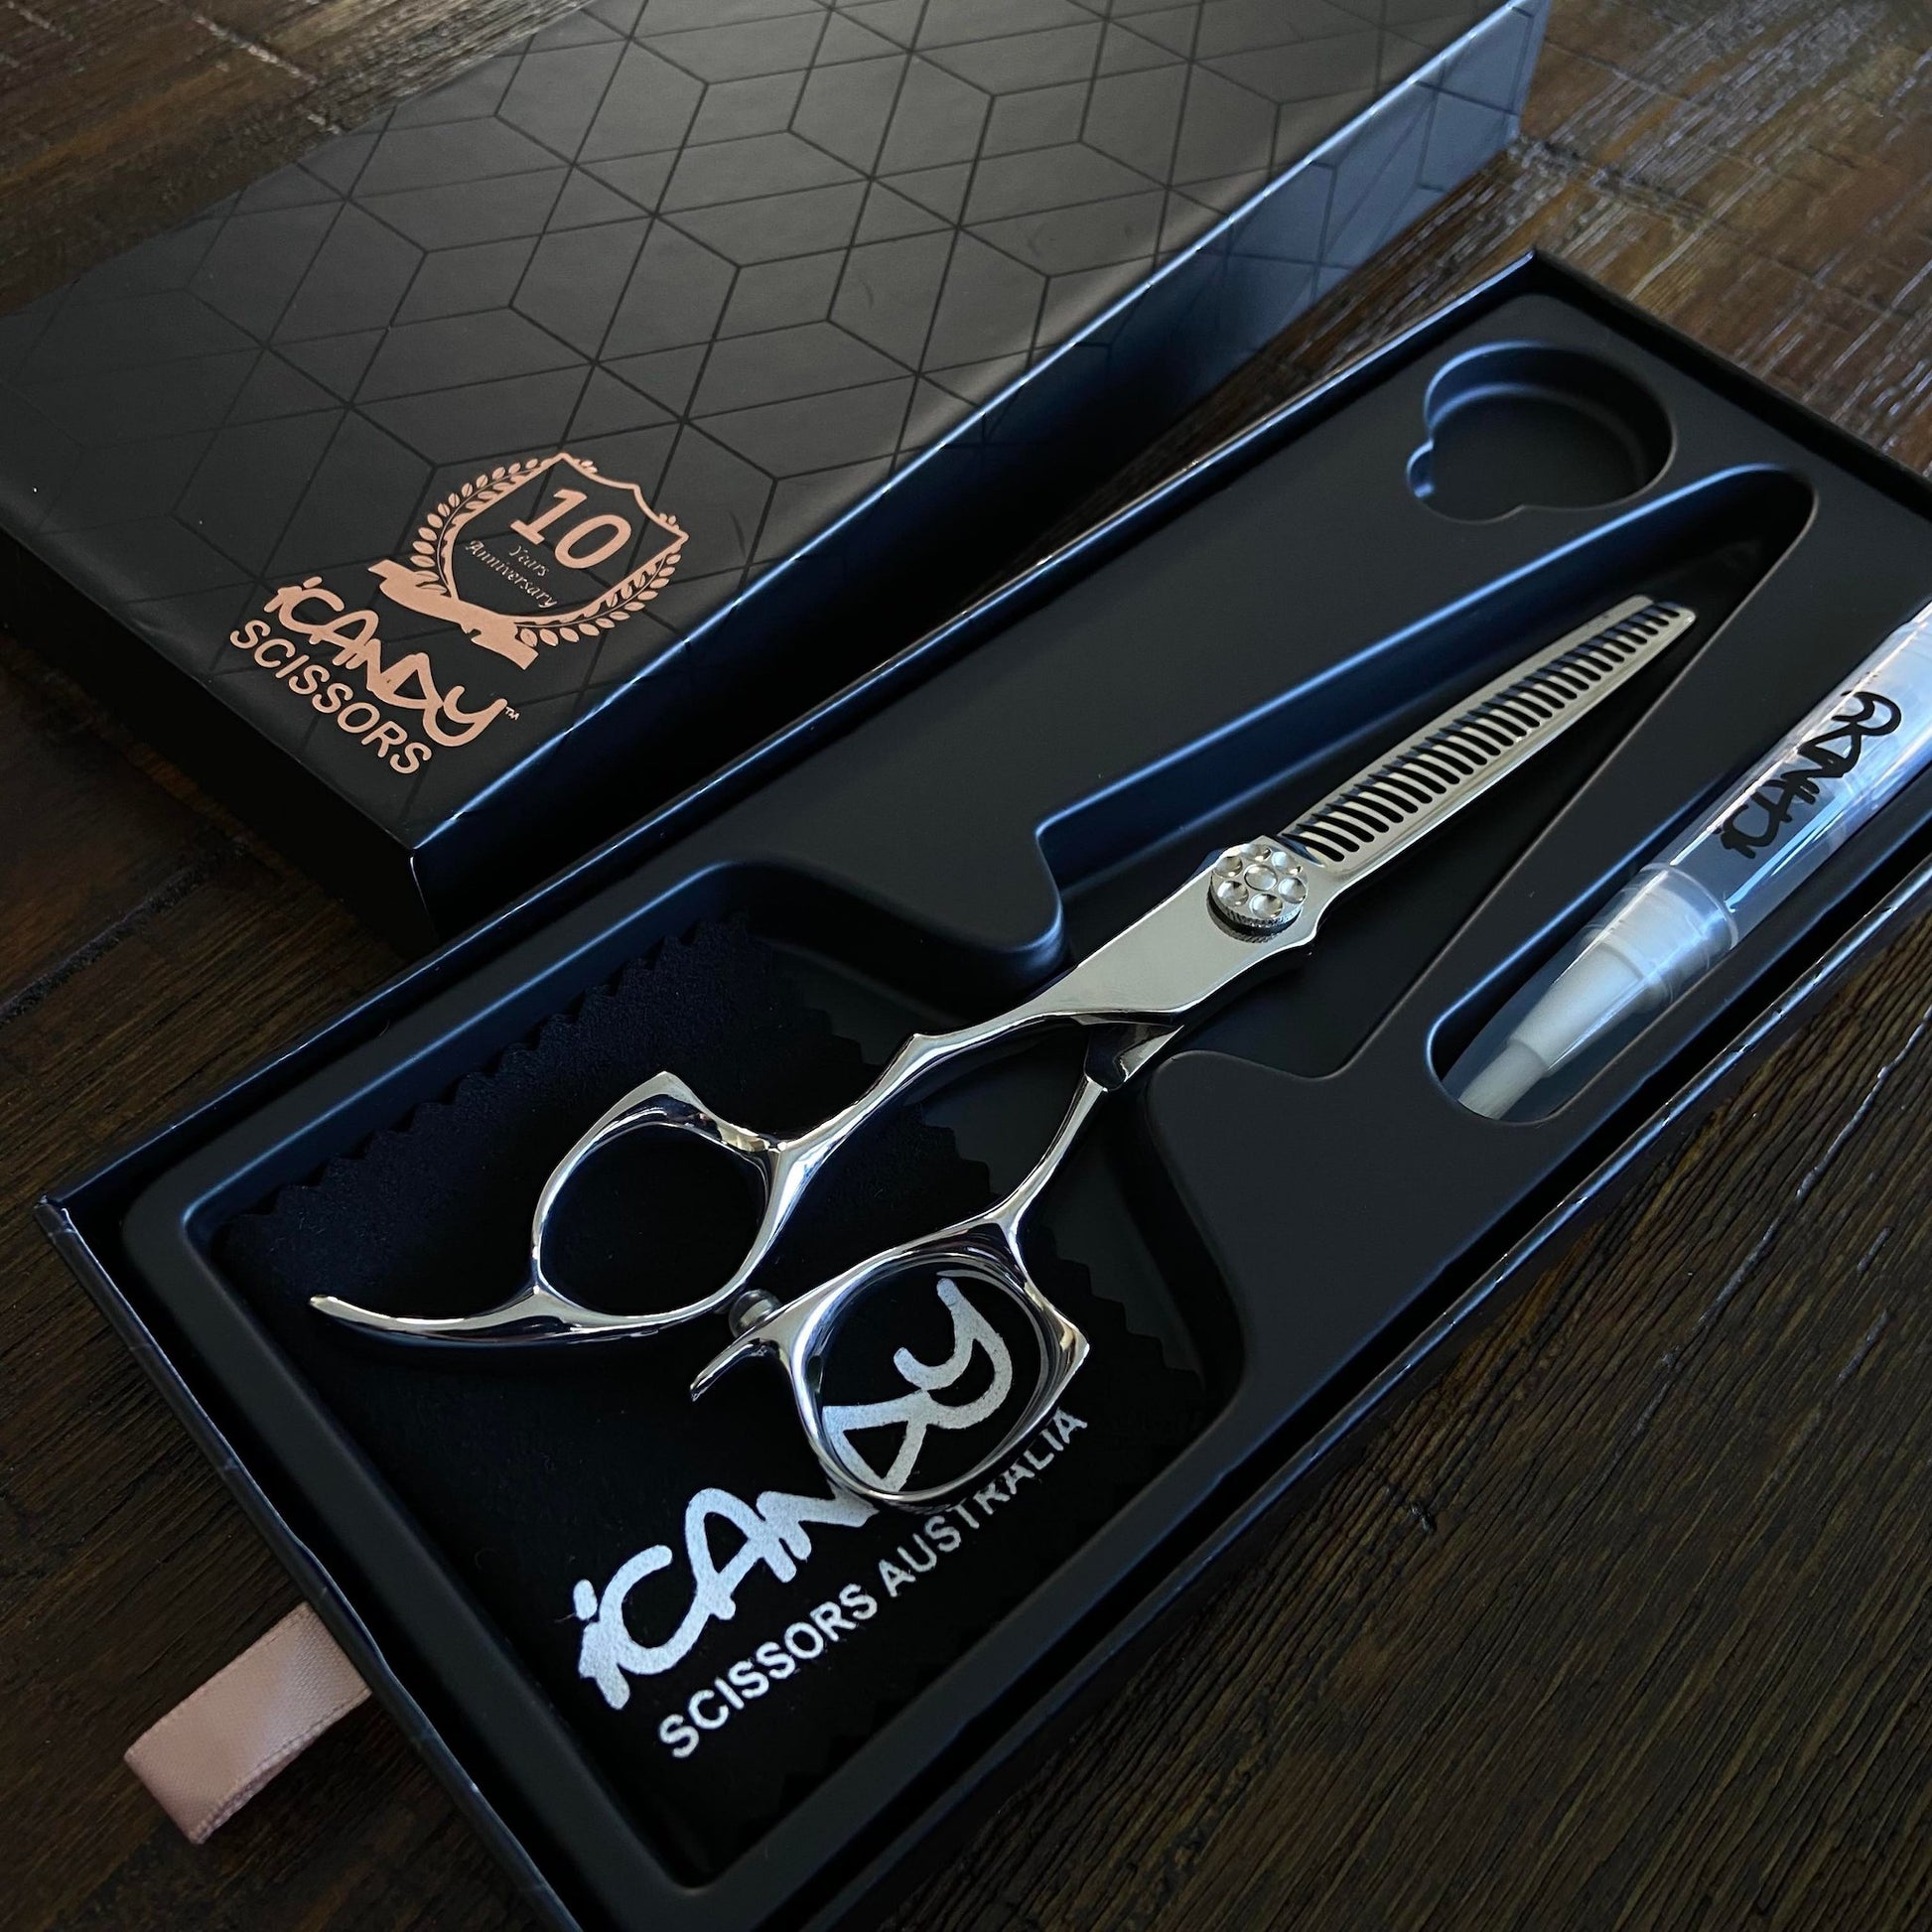 iCandy ALL STAR Silver LEFT HANDED Thinning Scissor 6.0" Open Box